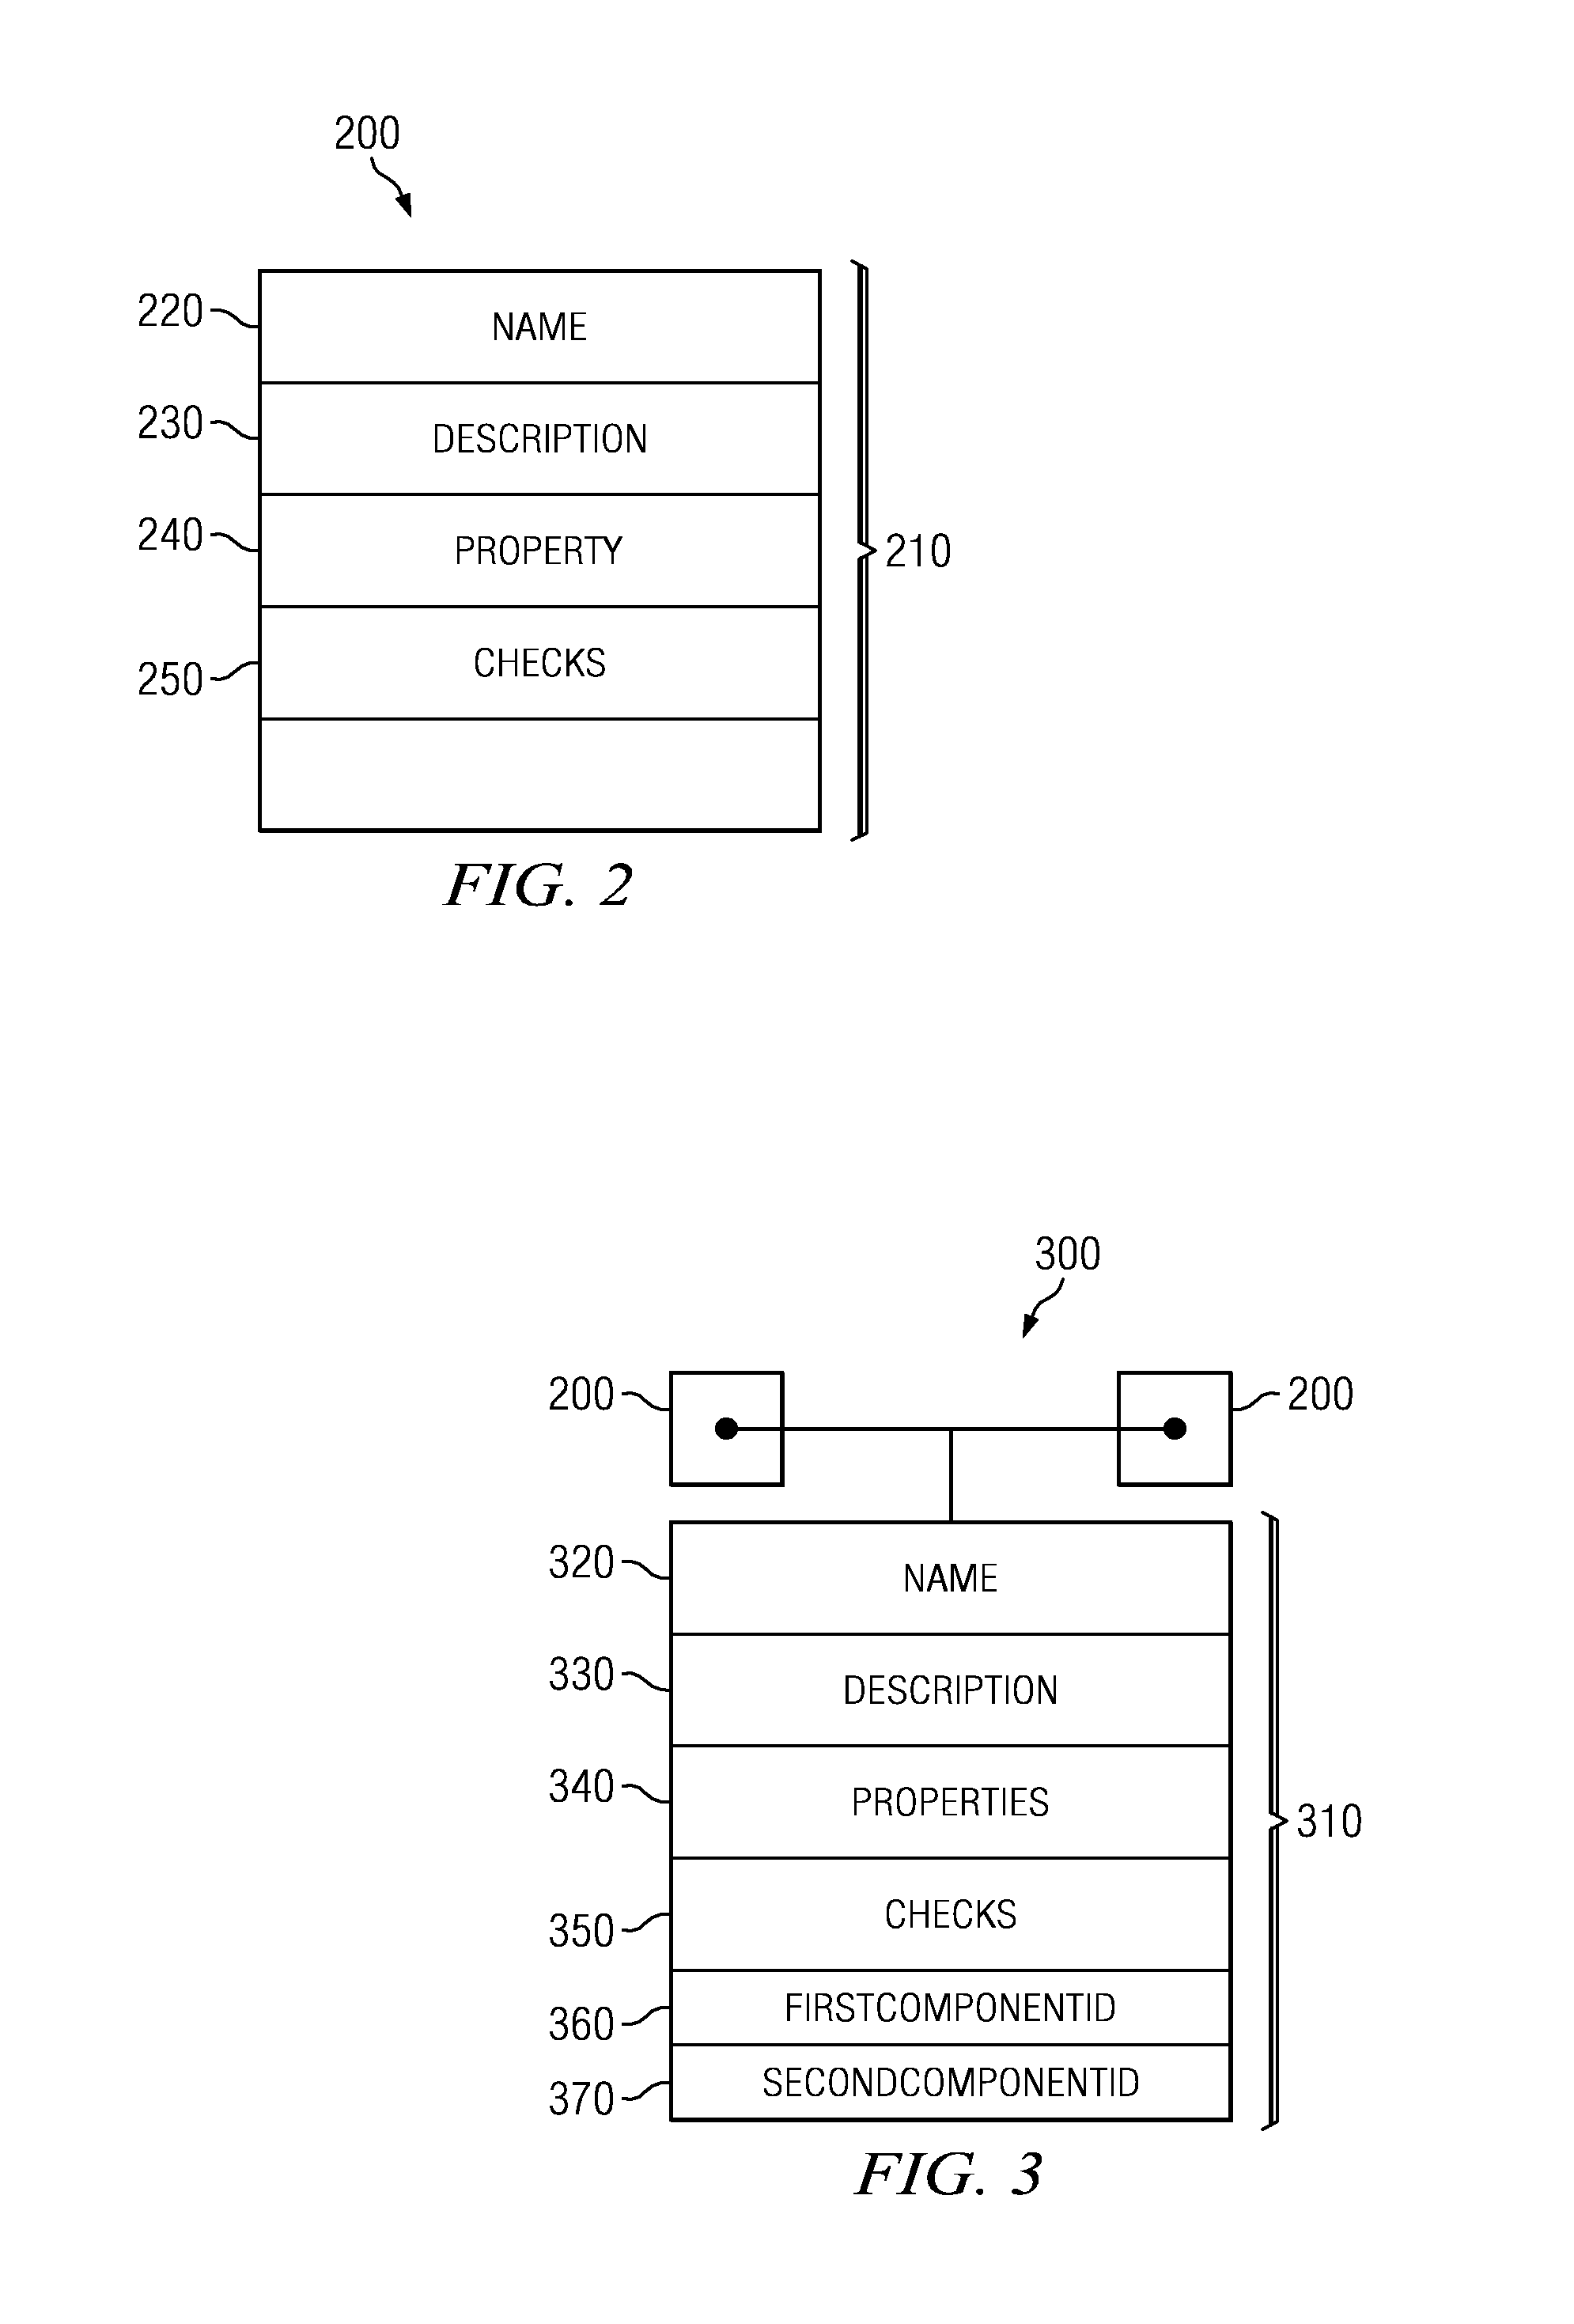 Method and system for impact analysis using a data model